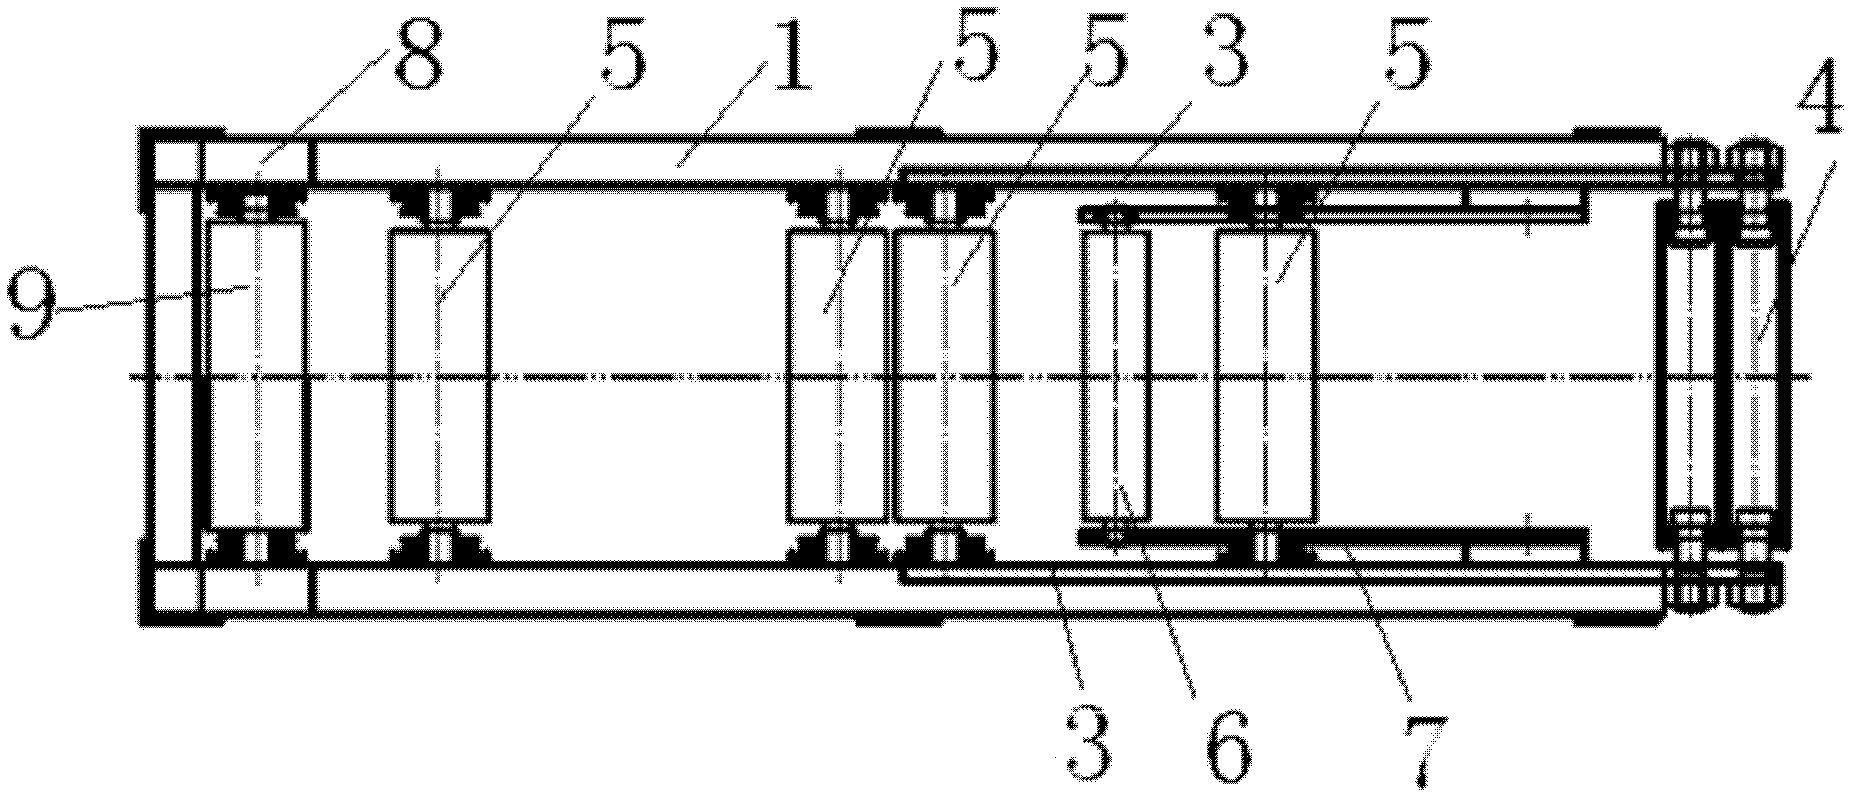 Tension device for weaving carbon fibers